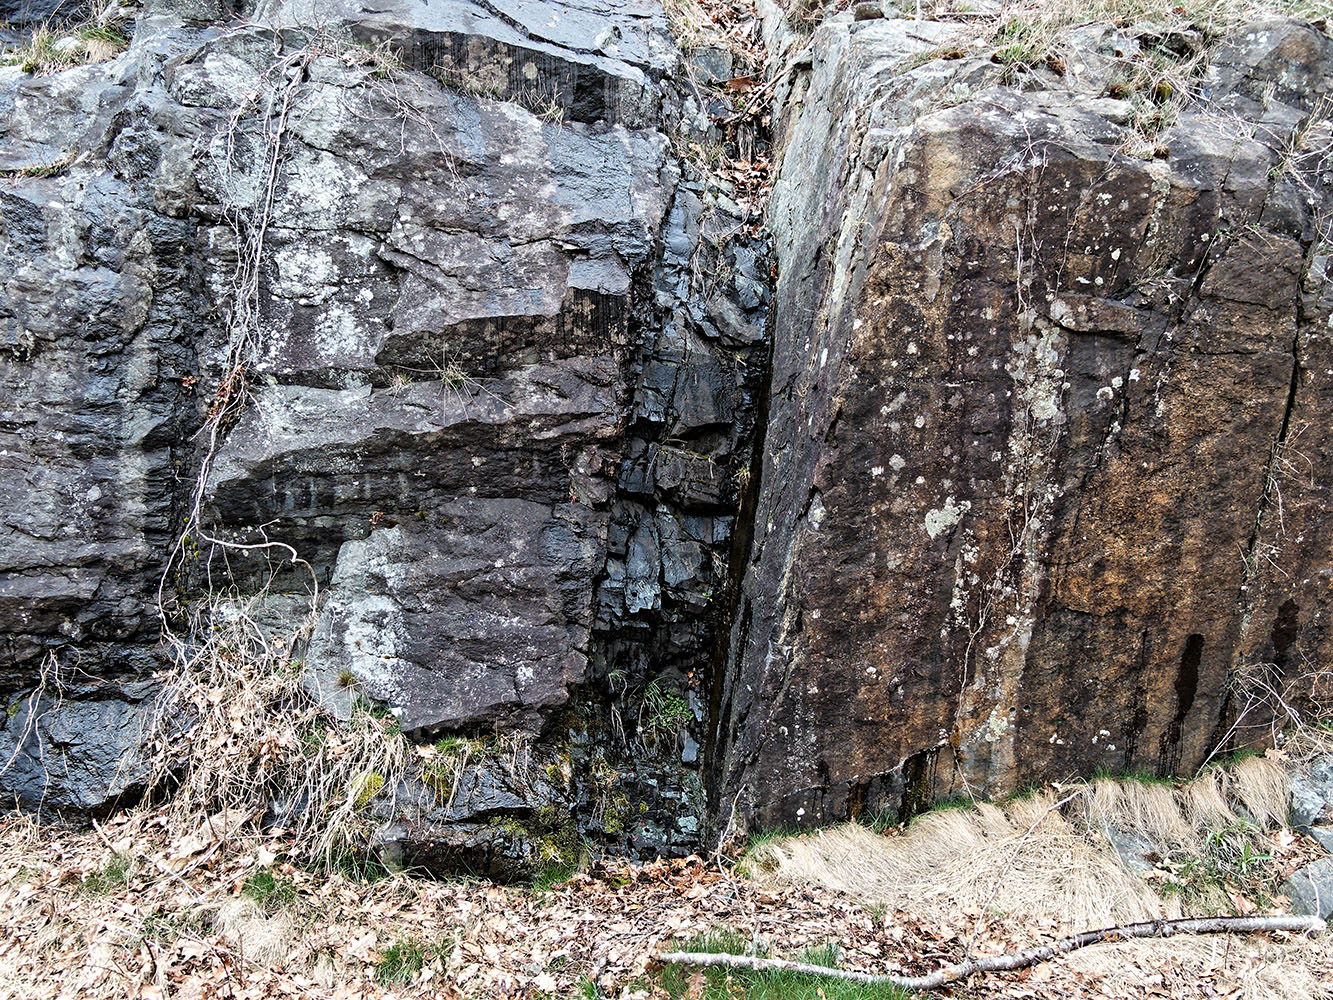 Metabasalt dike in Pedlar Formation gneiss.  Roadcut near Little Devils Staircase Overlook.   This is a feeder dike that probably developed about 570 to 700 Ma ago when Rodinia was rifting and the Iapetus Ocean was developing.  Magma that reached the surface contributed to the Catoctin Formation.